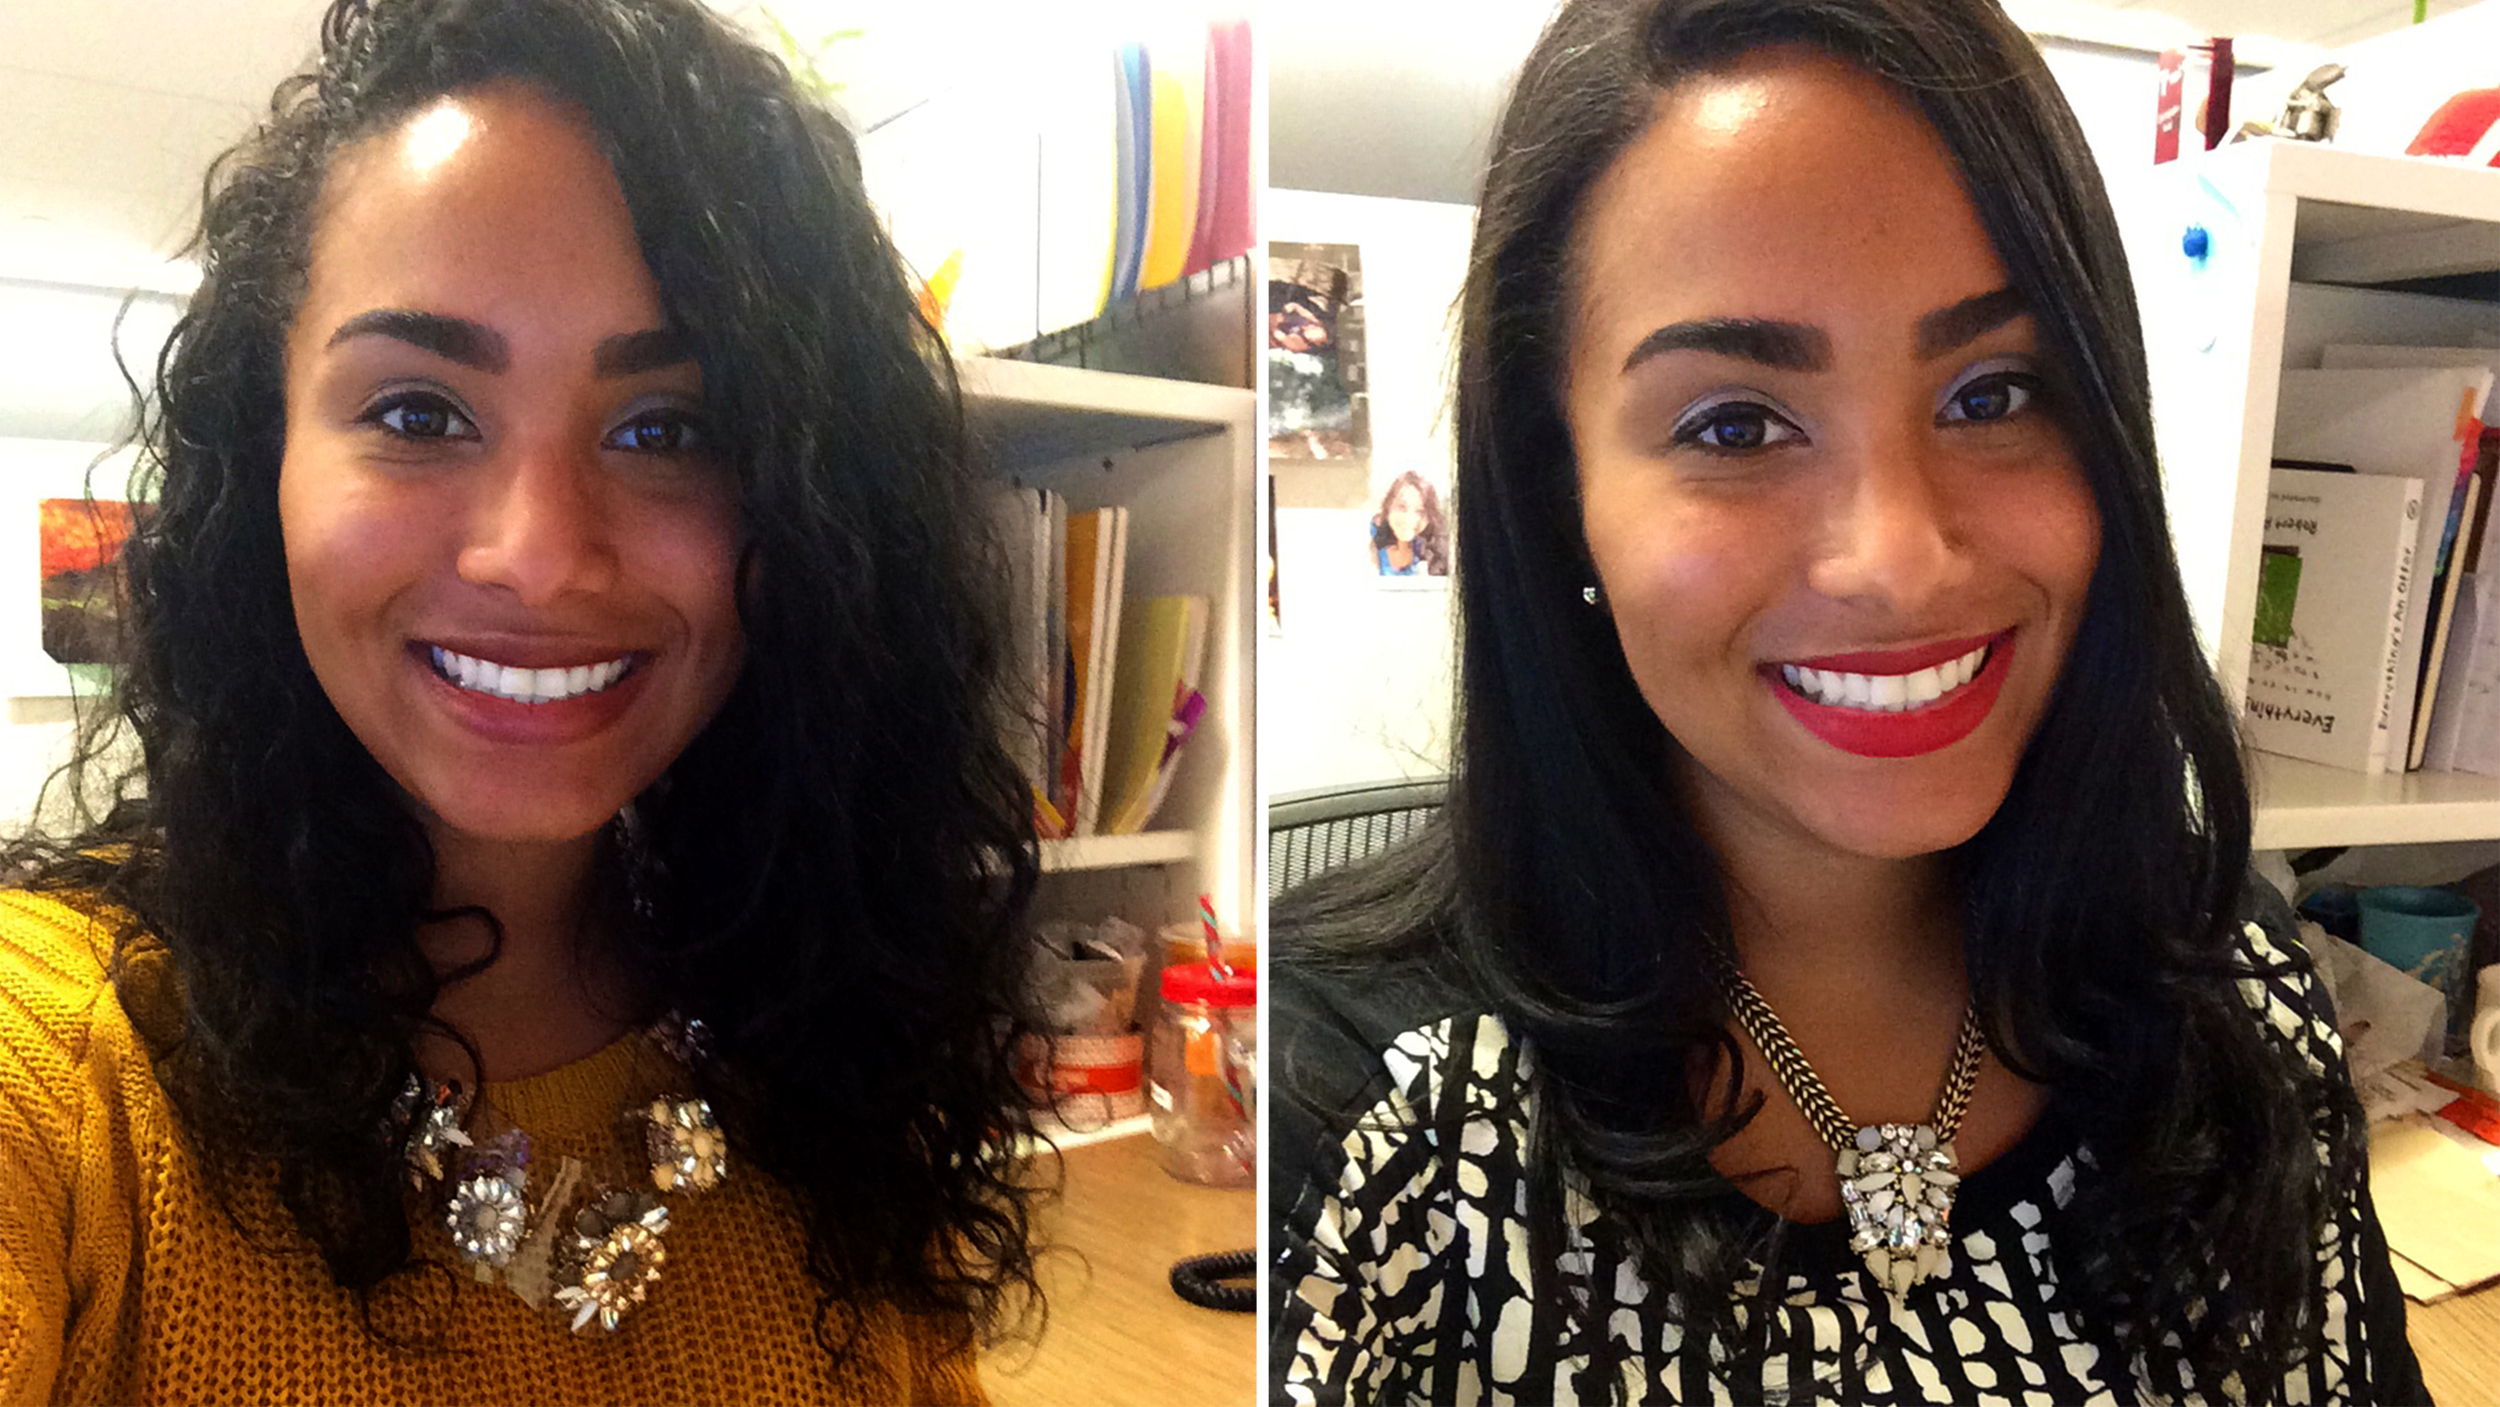 curlpower: women switch from curly to straight hairstyles to test